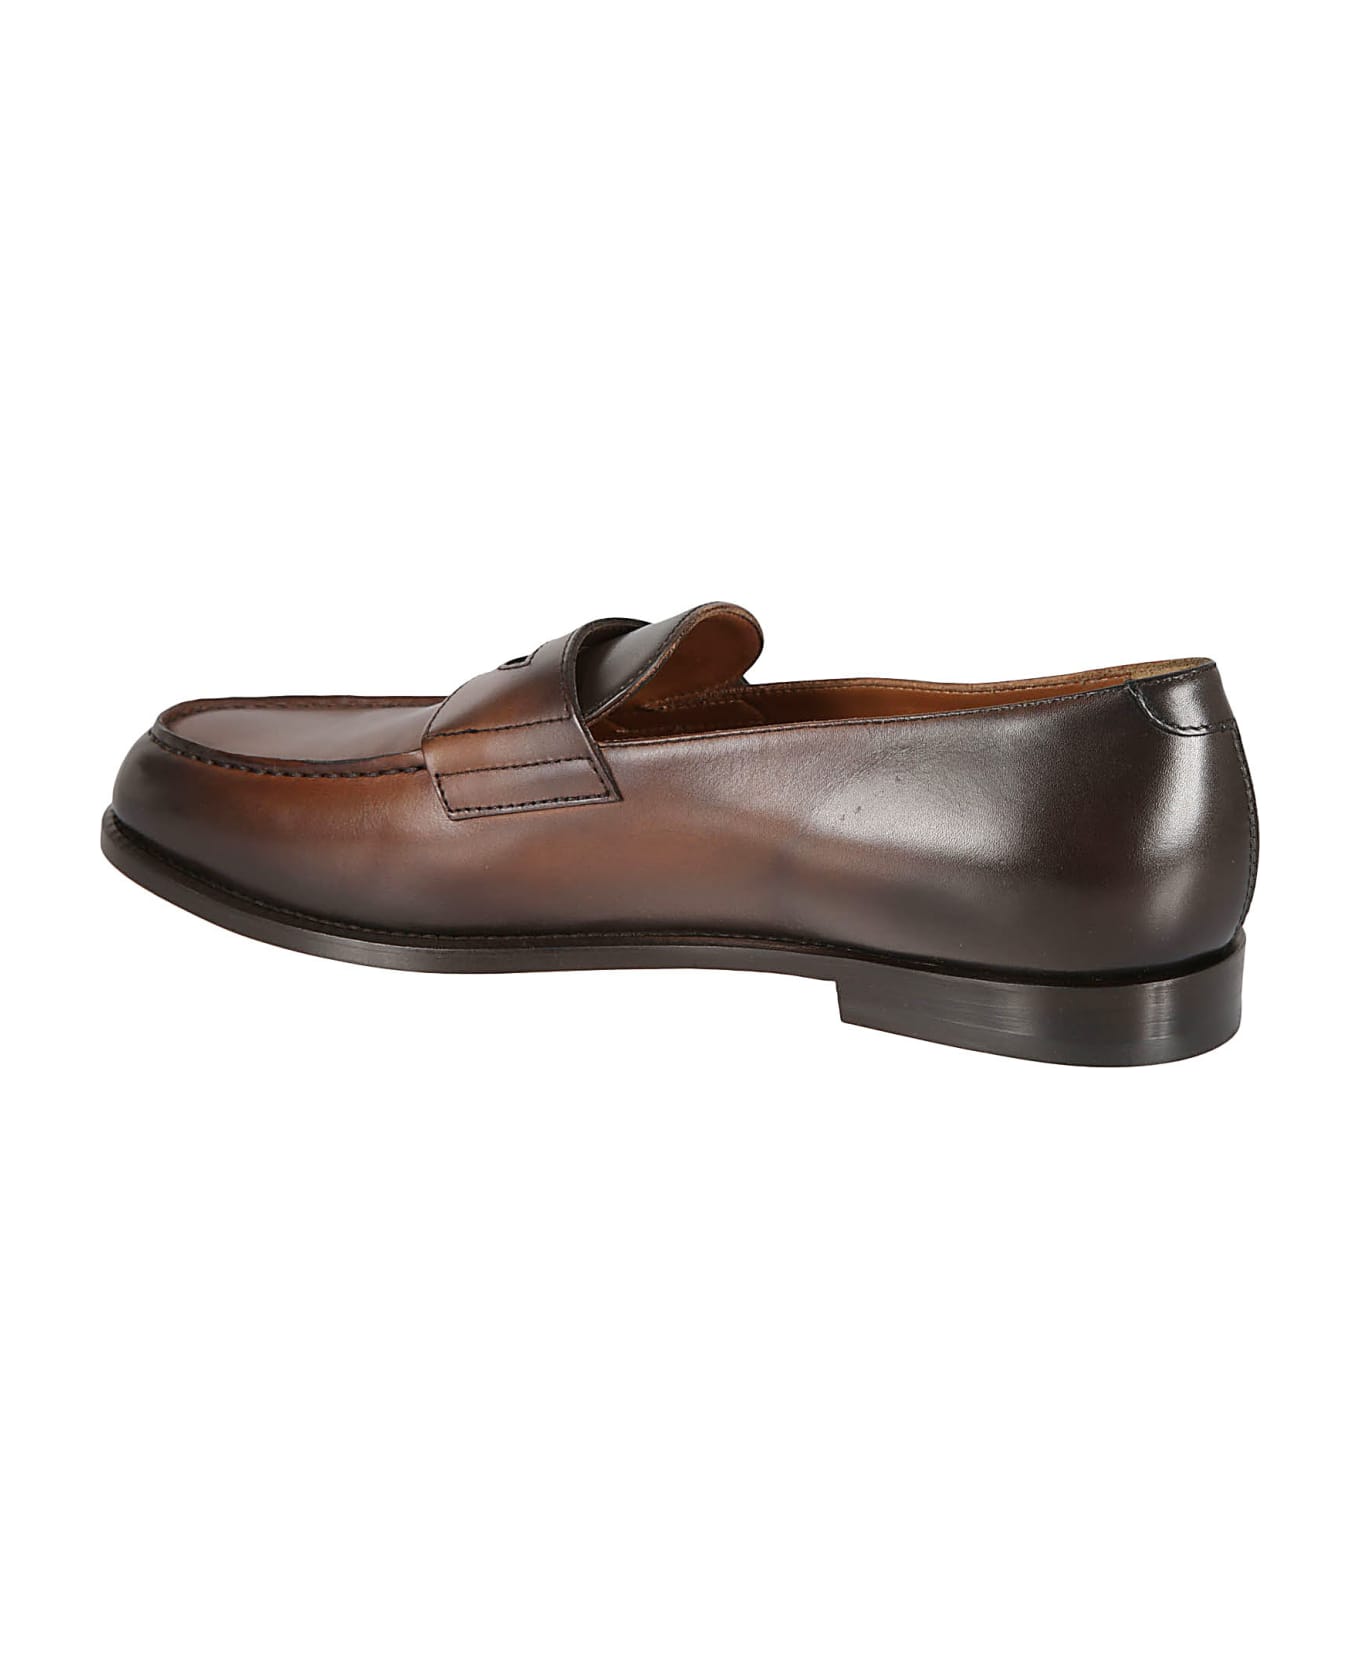 Doucal's Deco Loafers - Wood